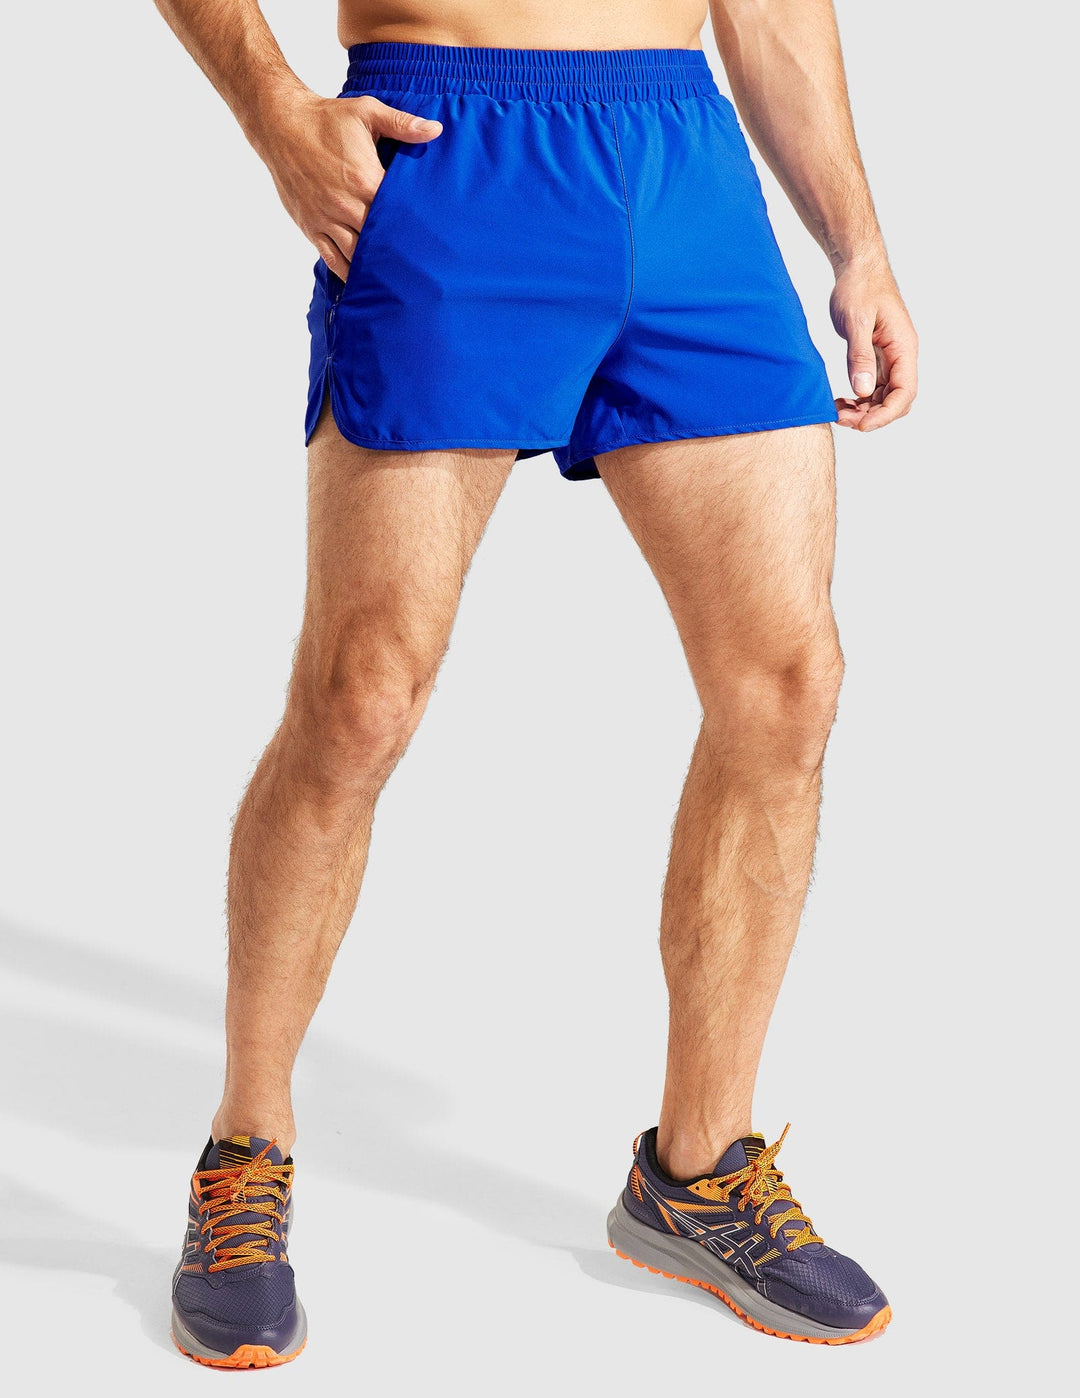 Short Pants Short Breathable Polyester Quick Dry Sports Shorts for Running